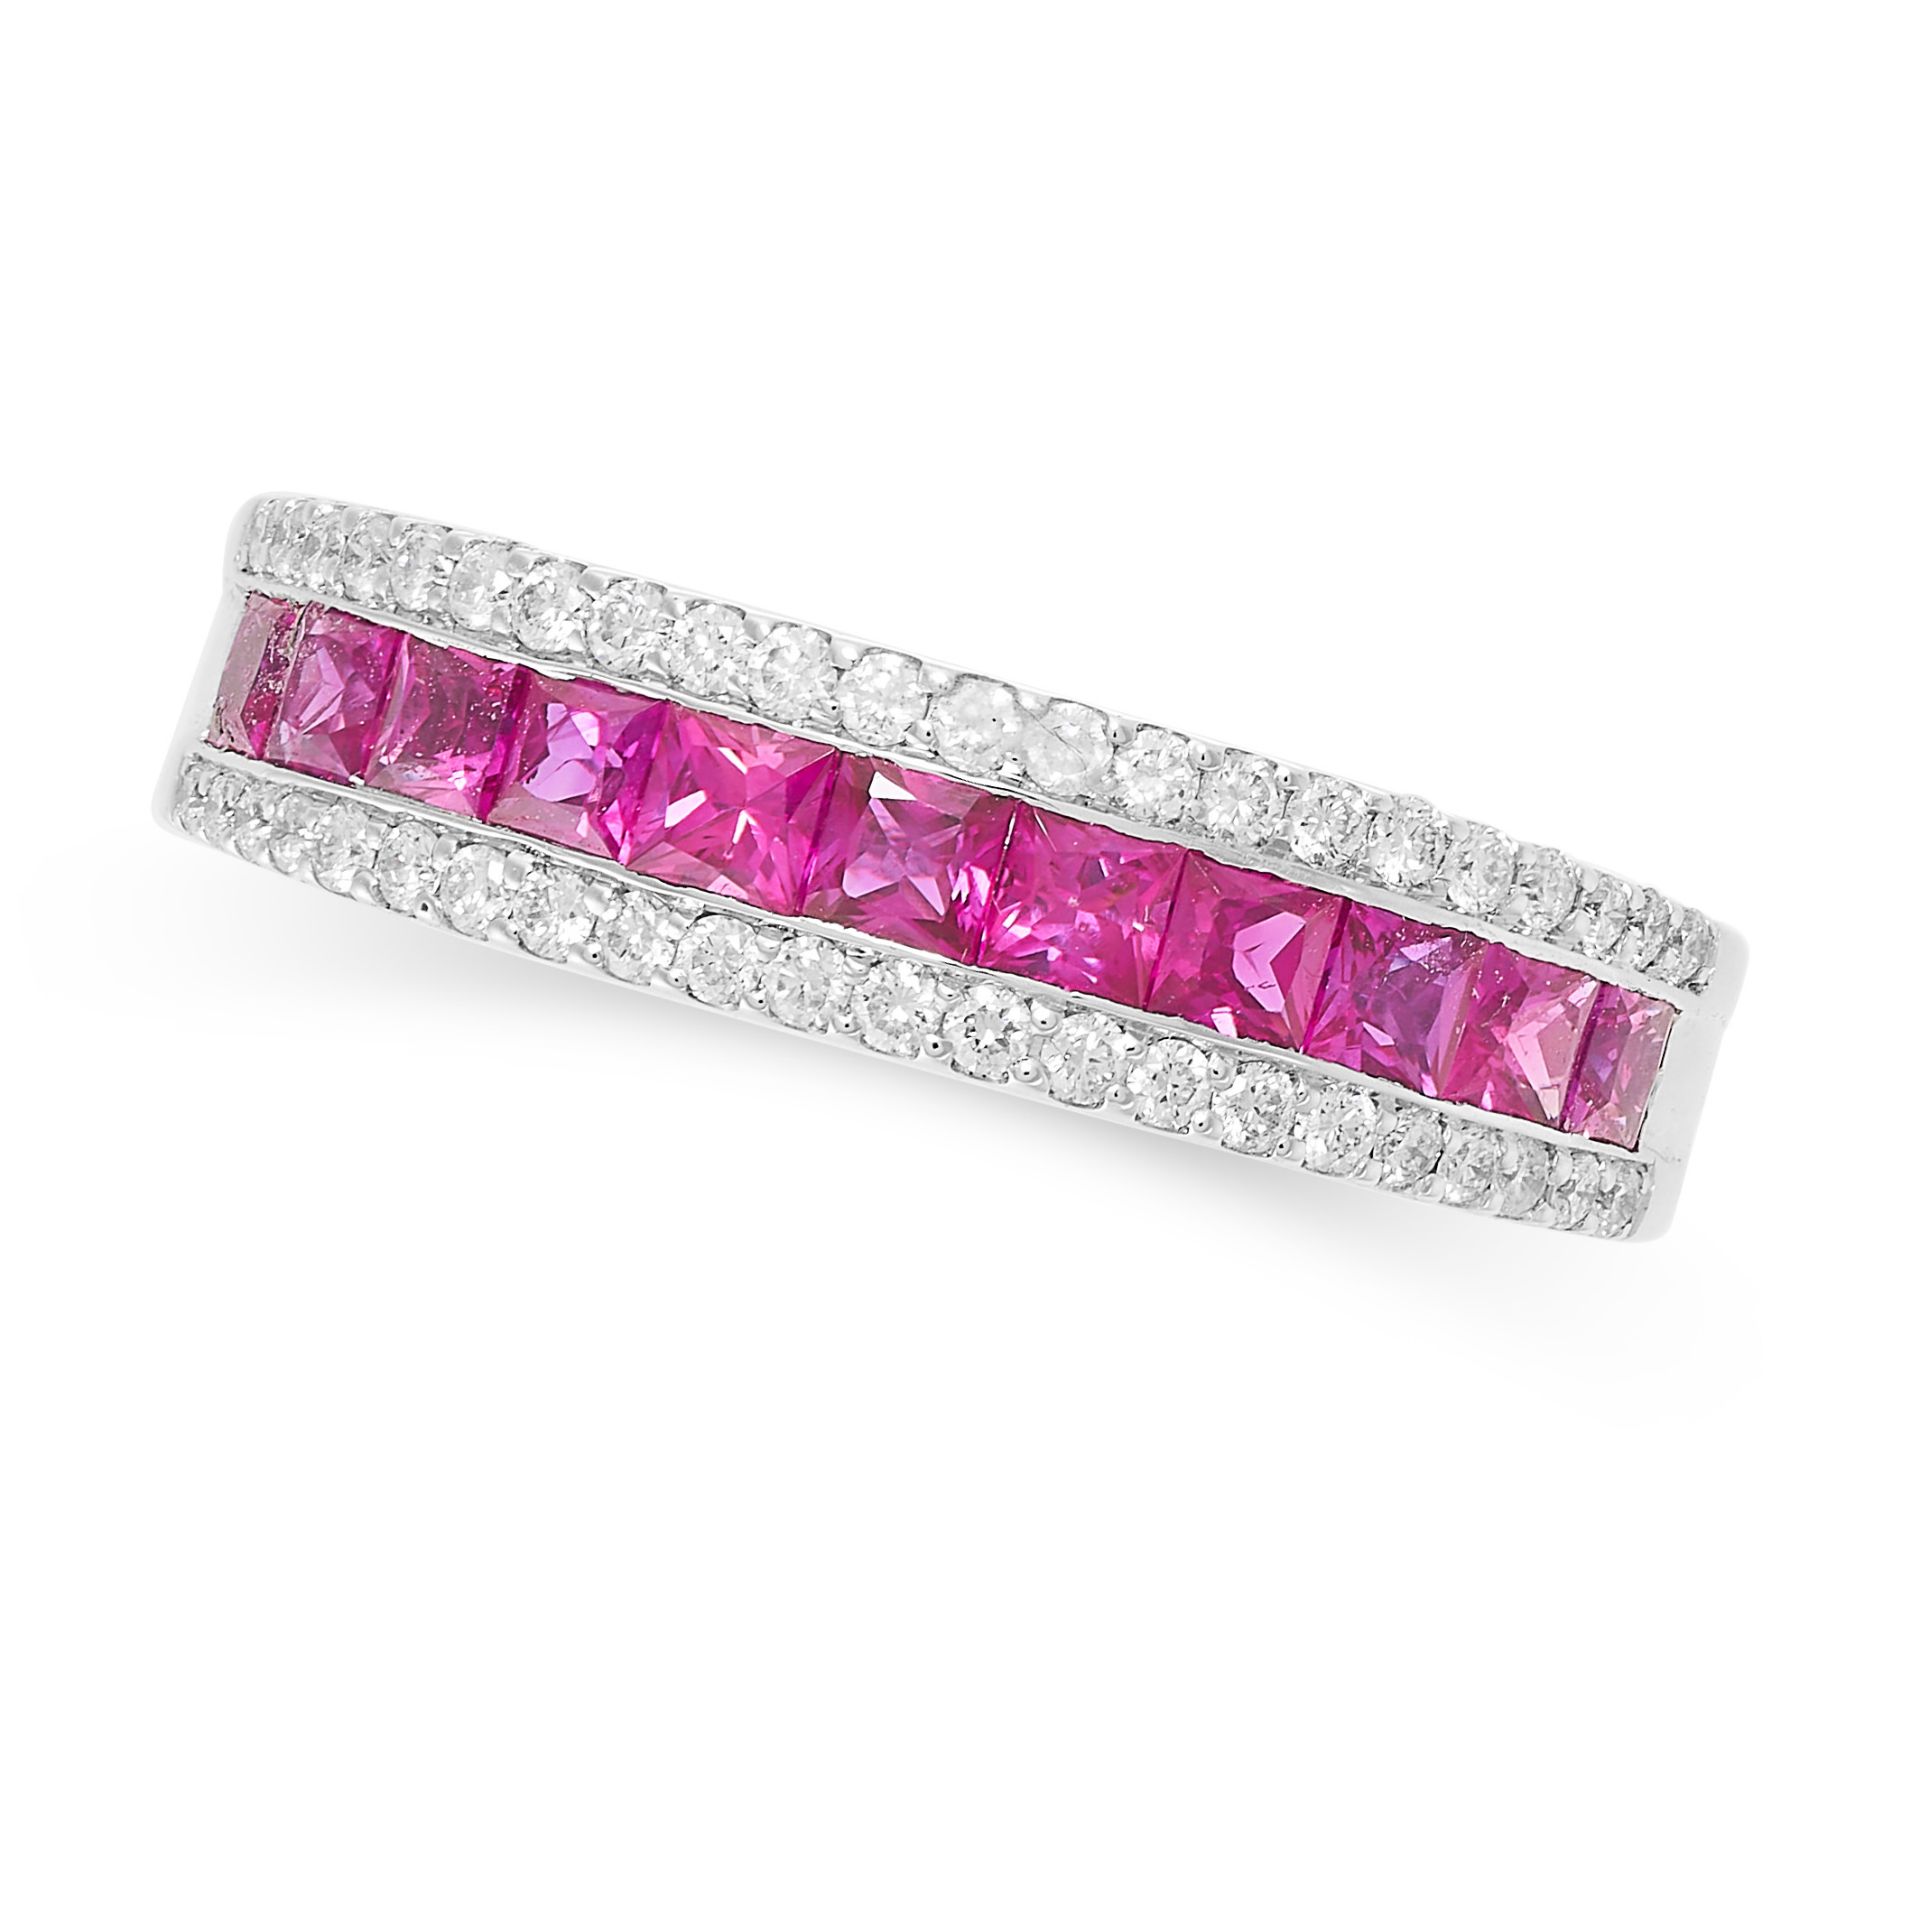 A RUBY AND DIAMOND ETERNITY RING in 18ct gold, set with a central row of French cut rubies between